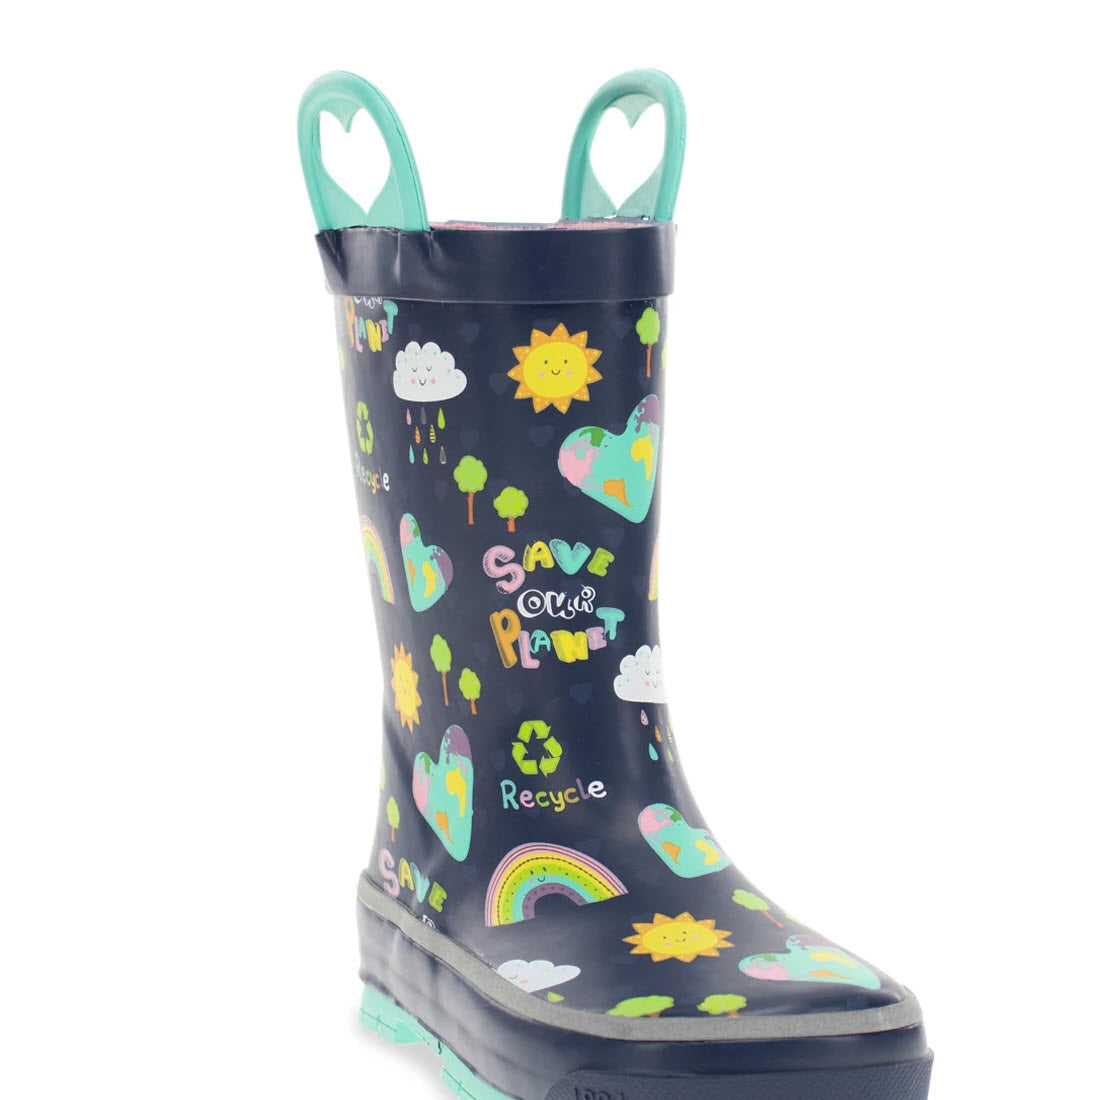 Children&#39;s waterproof rain boots with colorful print, featuring environmental-themed designs on a white background WESTERN CHIEF SAVE OUR PLANET NAVY - KIDS boots by Western Chief.